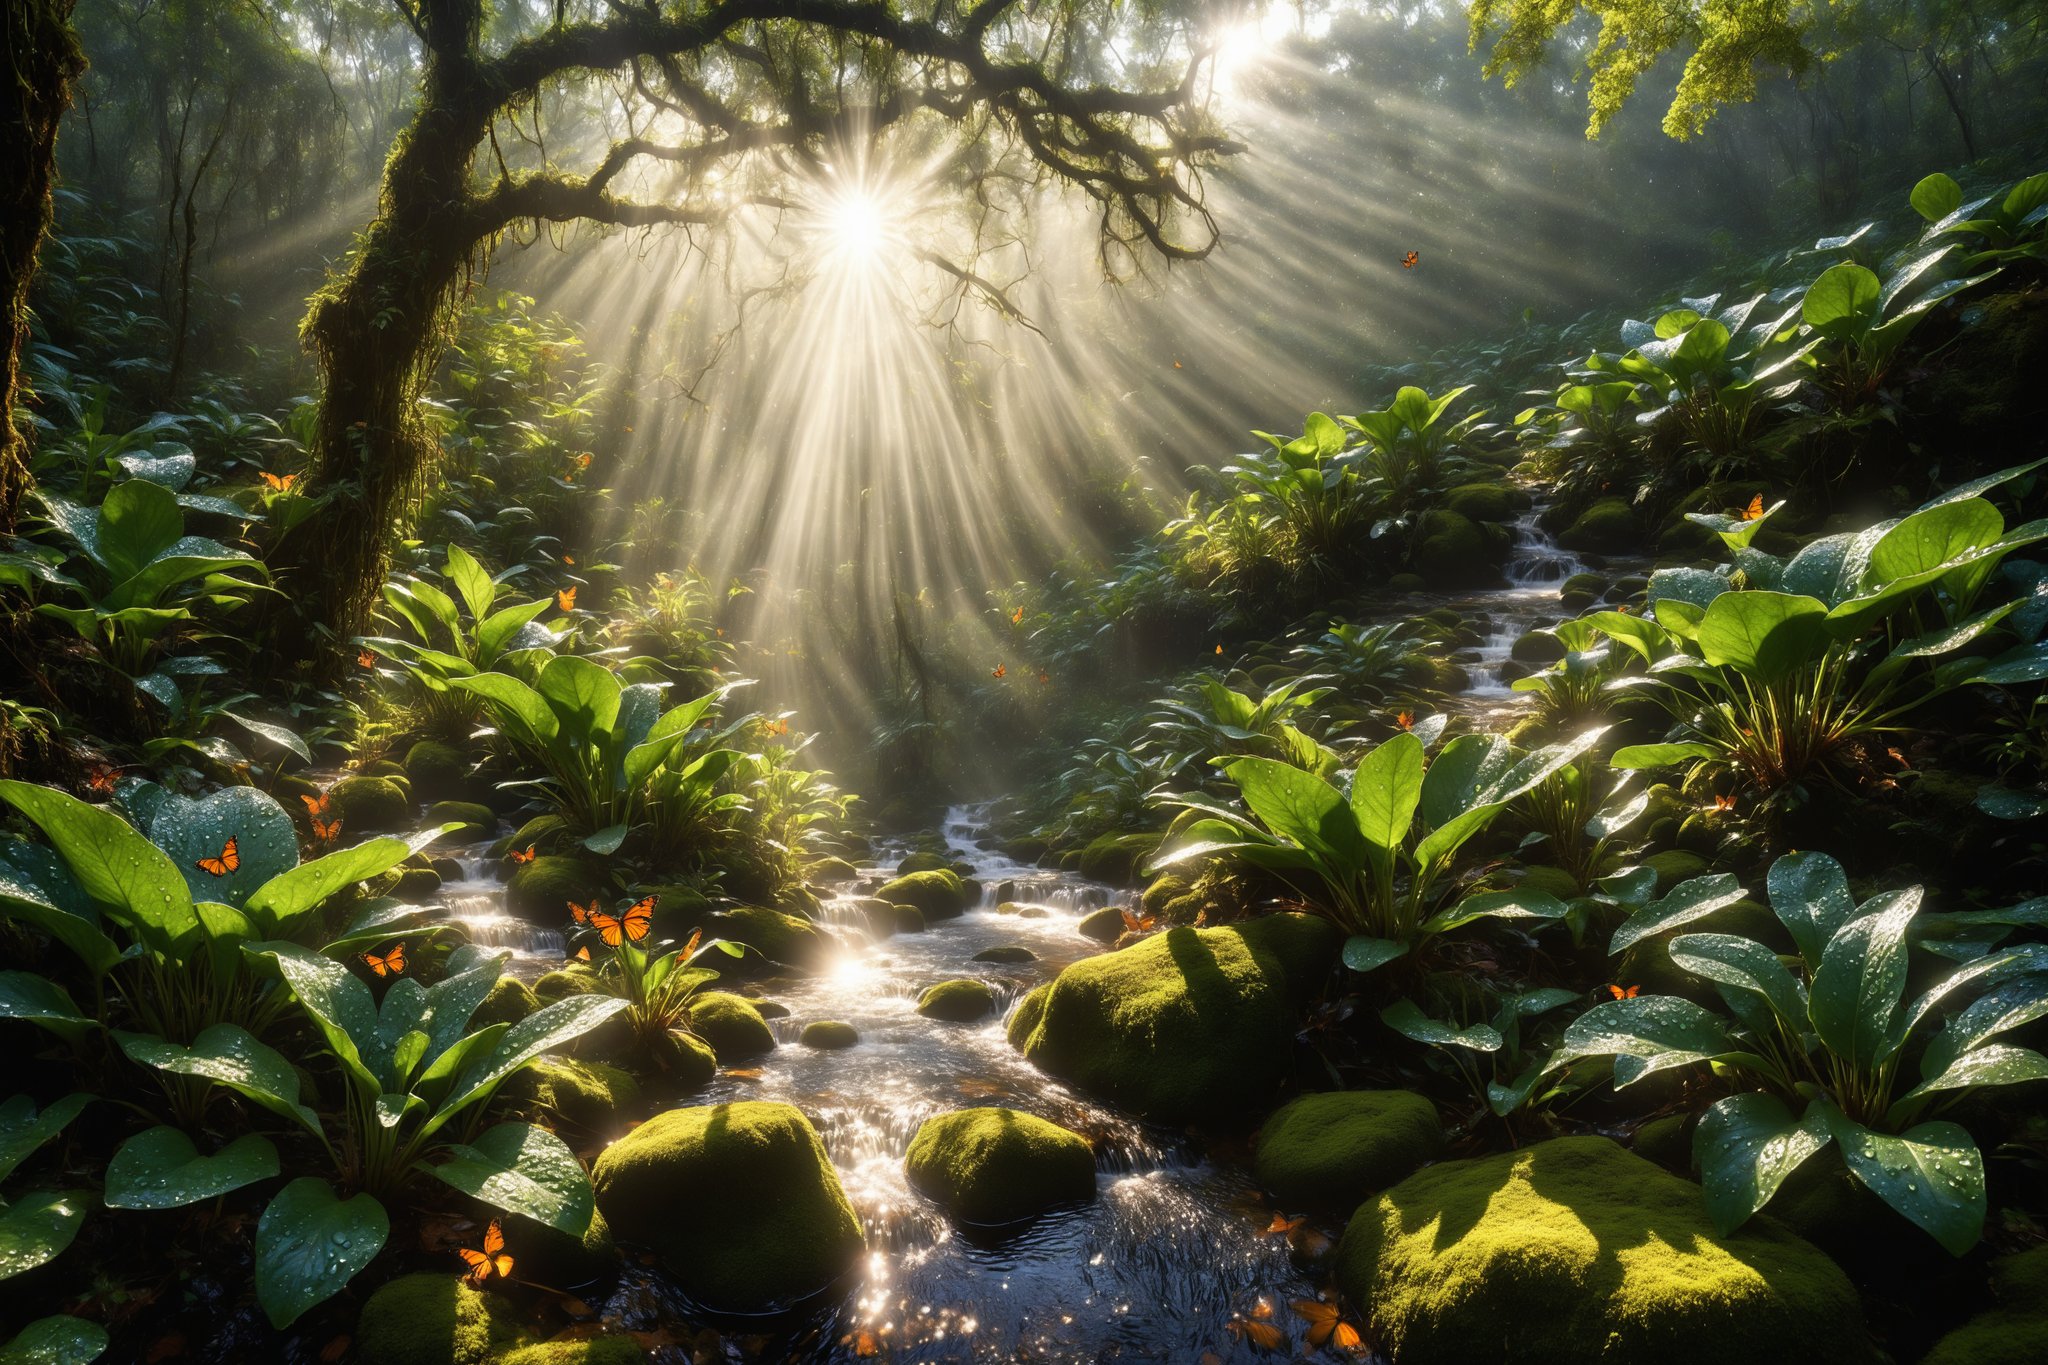 A close up wide angle panoramic photograph through dense giant shoulder high  wet dew drop covered leaves revealing a winding clear stream leading downwards through a clearing in a dense tropical forest. The stream drops down to a tall cascading waterfall dropping down in to a clear pool with black and white opals refelcting the sunlight in a miriad colours. BREAK Surrounded by flowers. Butterflies, frogs, mice, rabbits, foxes, birds and insects fly in and out of the laser straight rays of sunlight breaking through the canopy. The wet forest leaves and  shrubbery catches the light on a fresh crisp bright morning. Ultra High resolution photograph, 8k, SHD, HDR, Sharp focus, Depth of field. Digital painting ,DRG